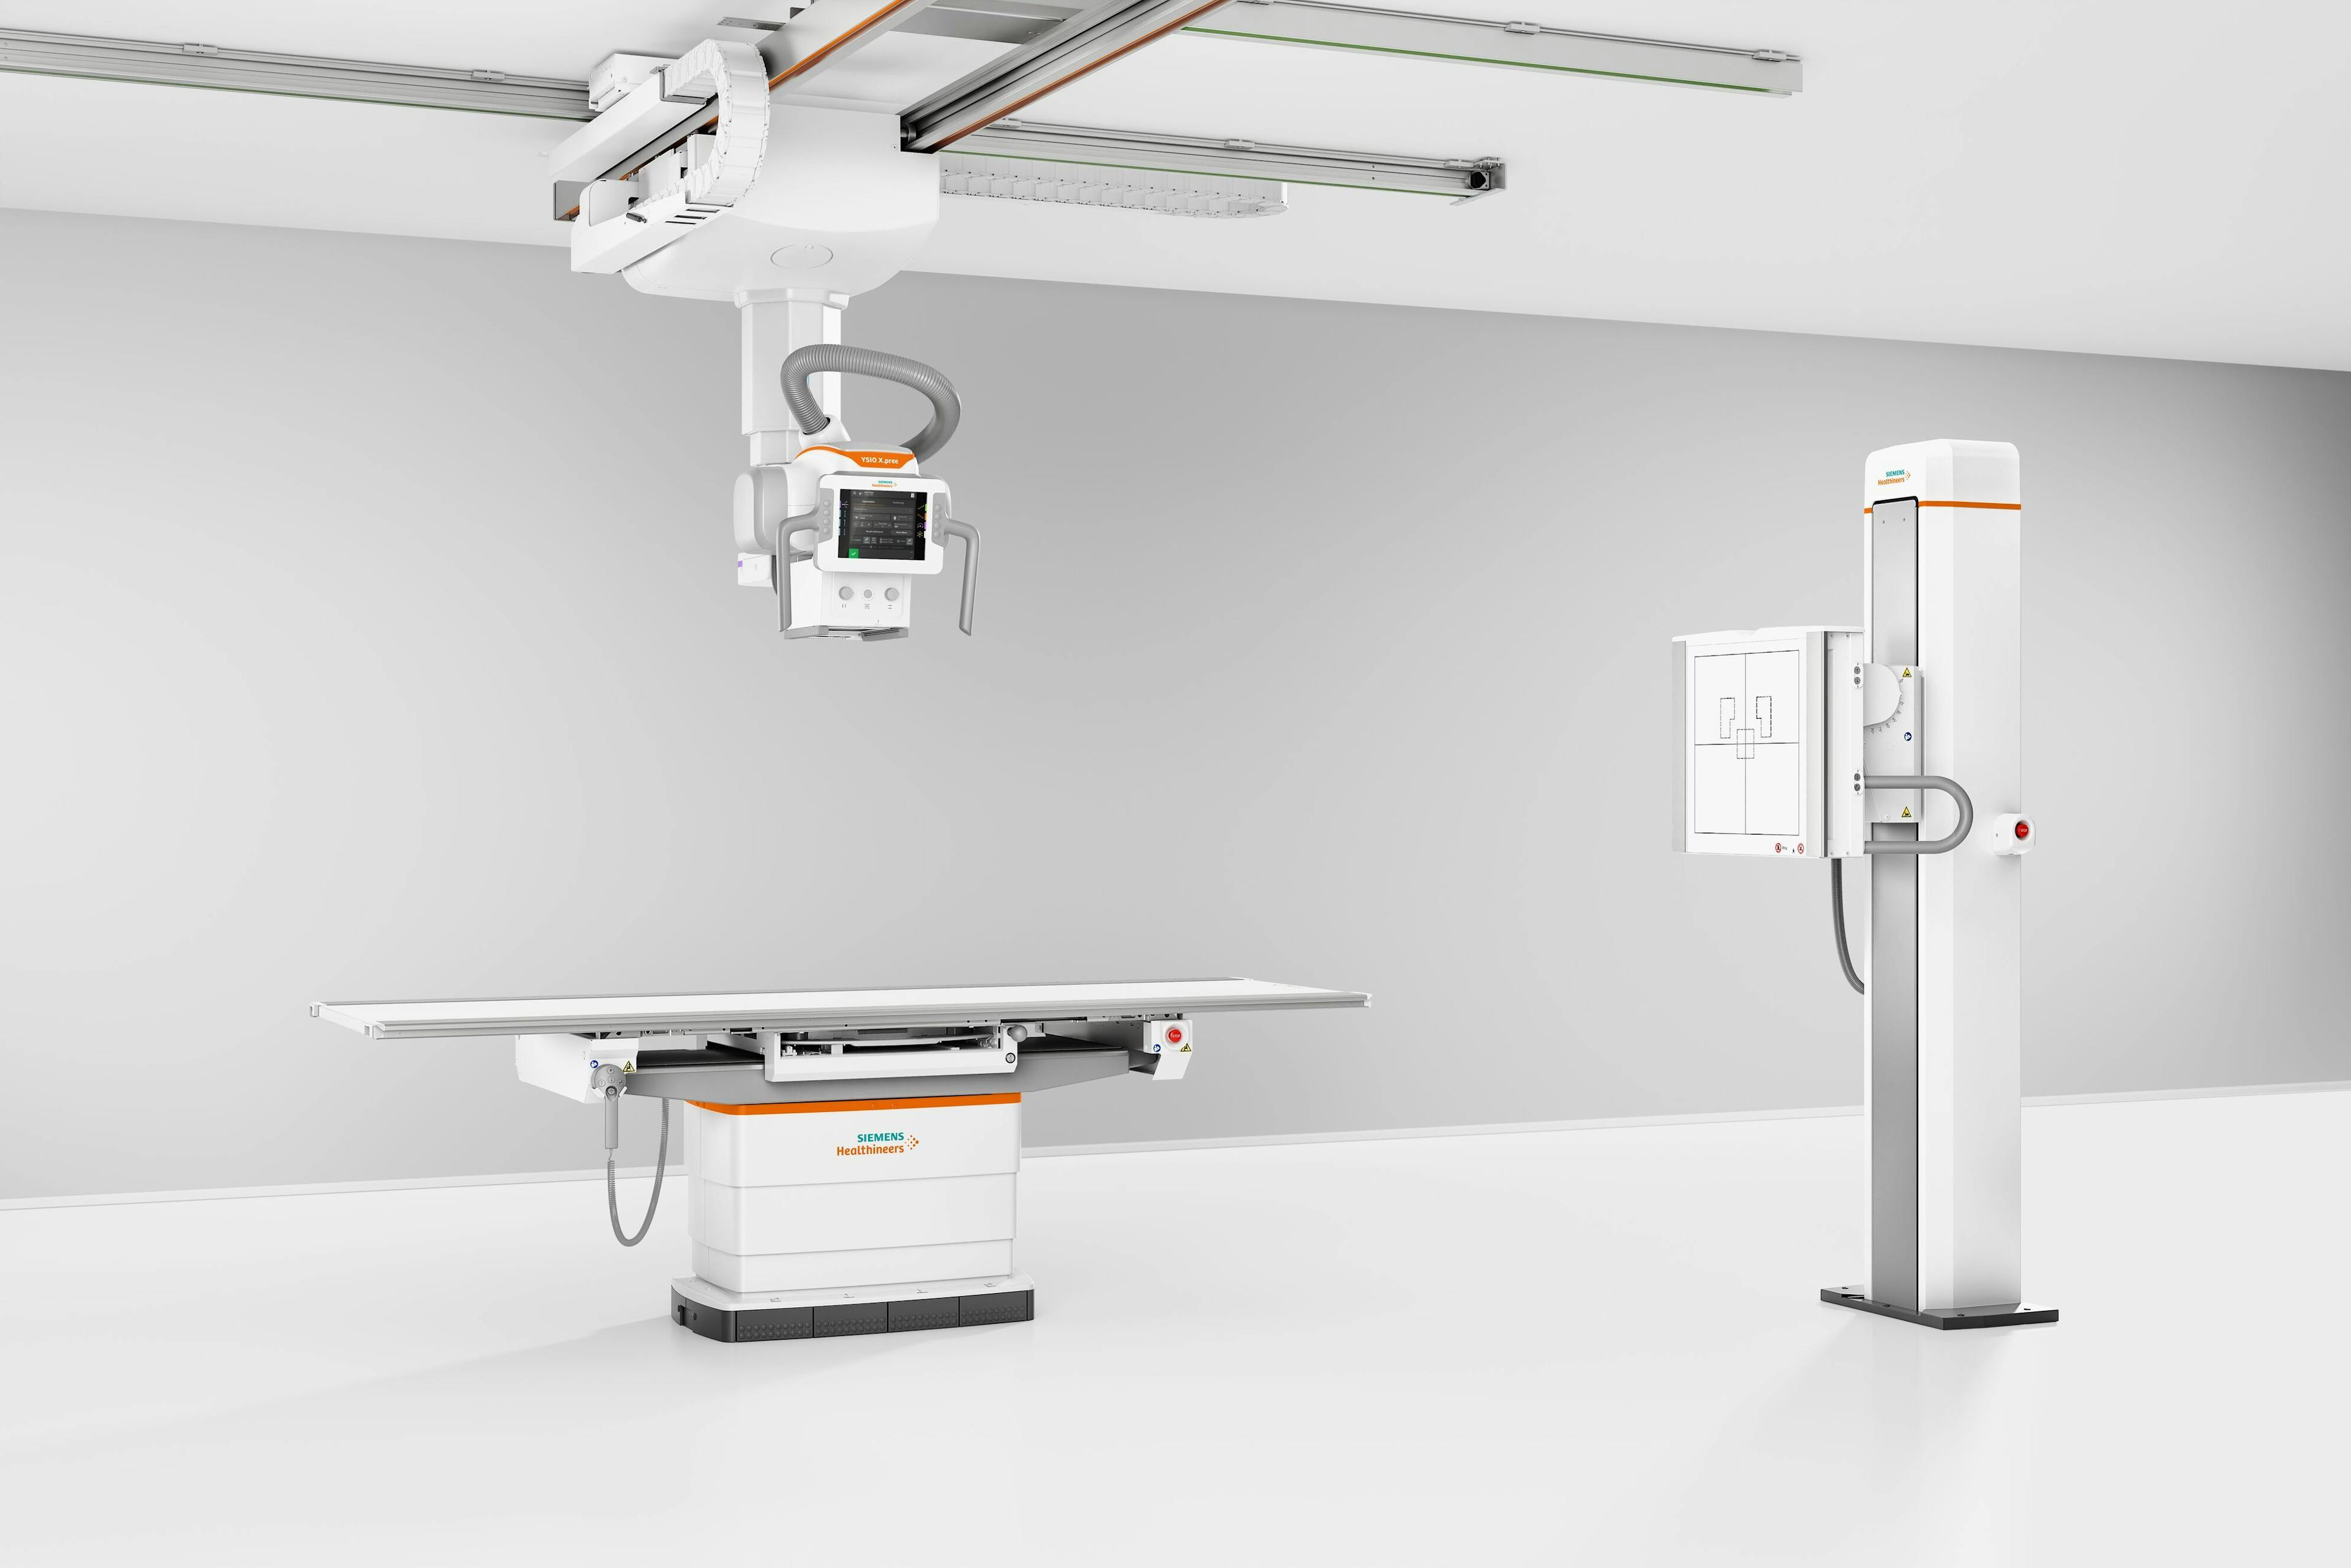 FDA Clears Siemens Healthineers Intelligent Radiography System